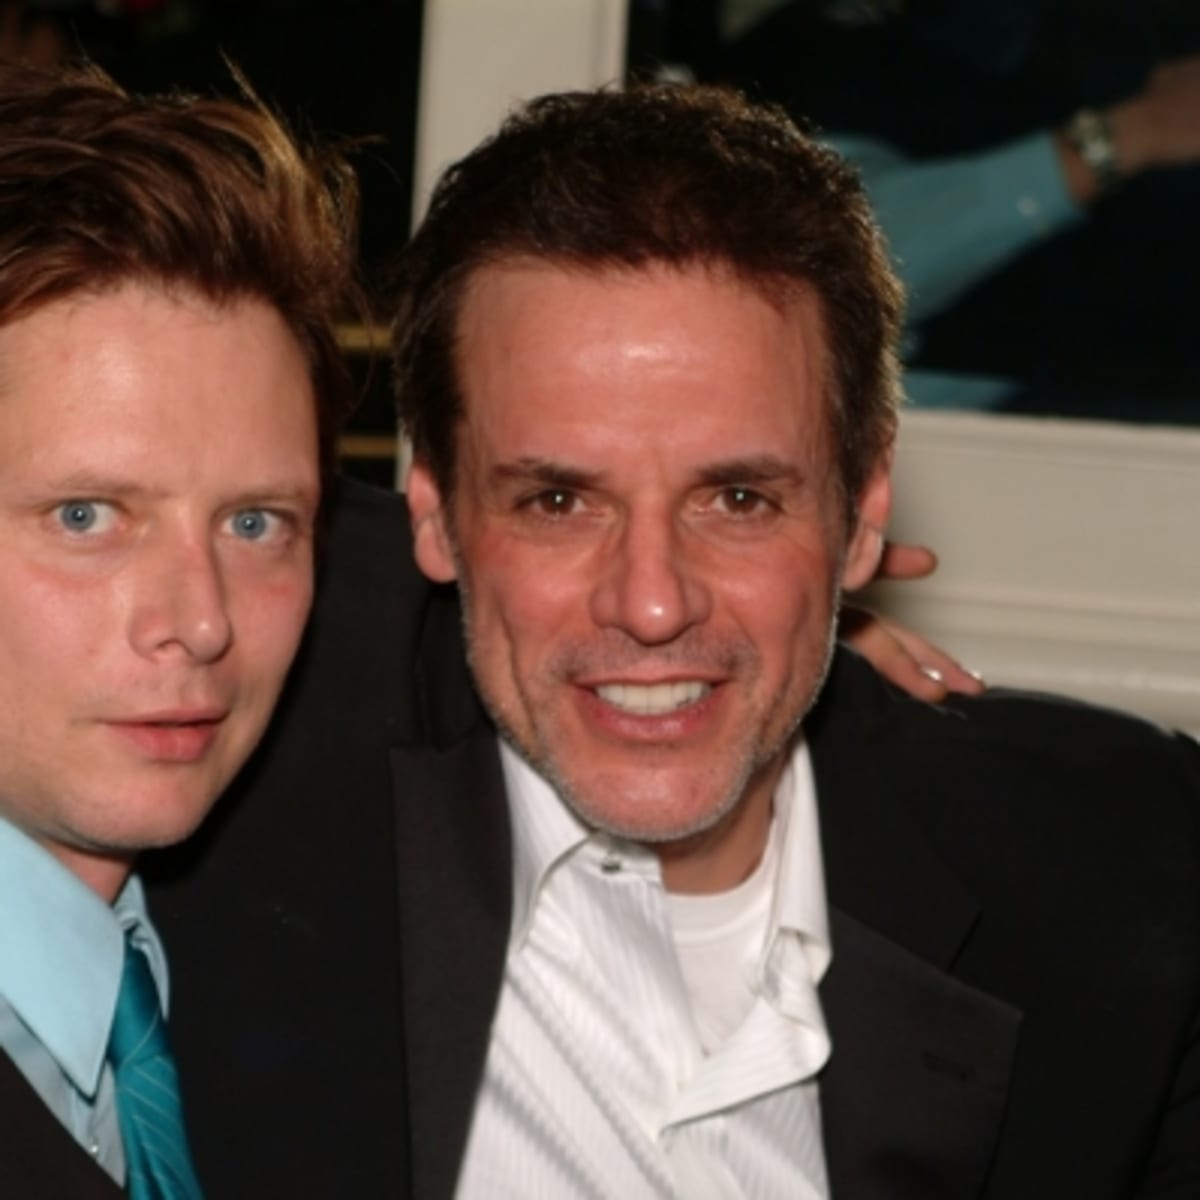 SNAPSHOTS: Y&R's Christian LeBlanc 90's Pop Star Jeremy at ACME Comedy Awards! Confidential